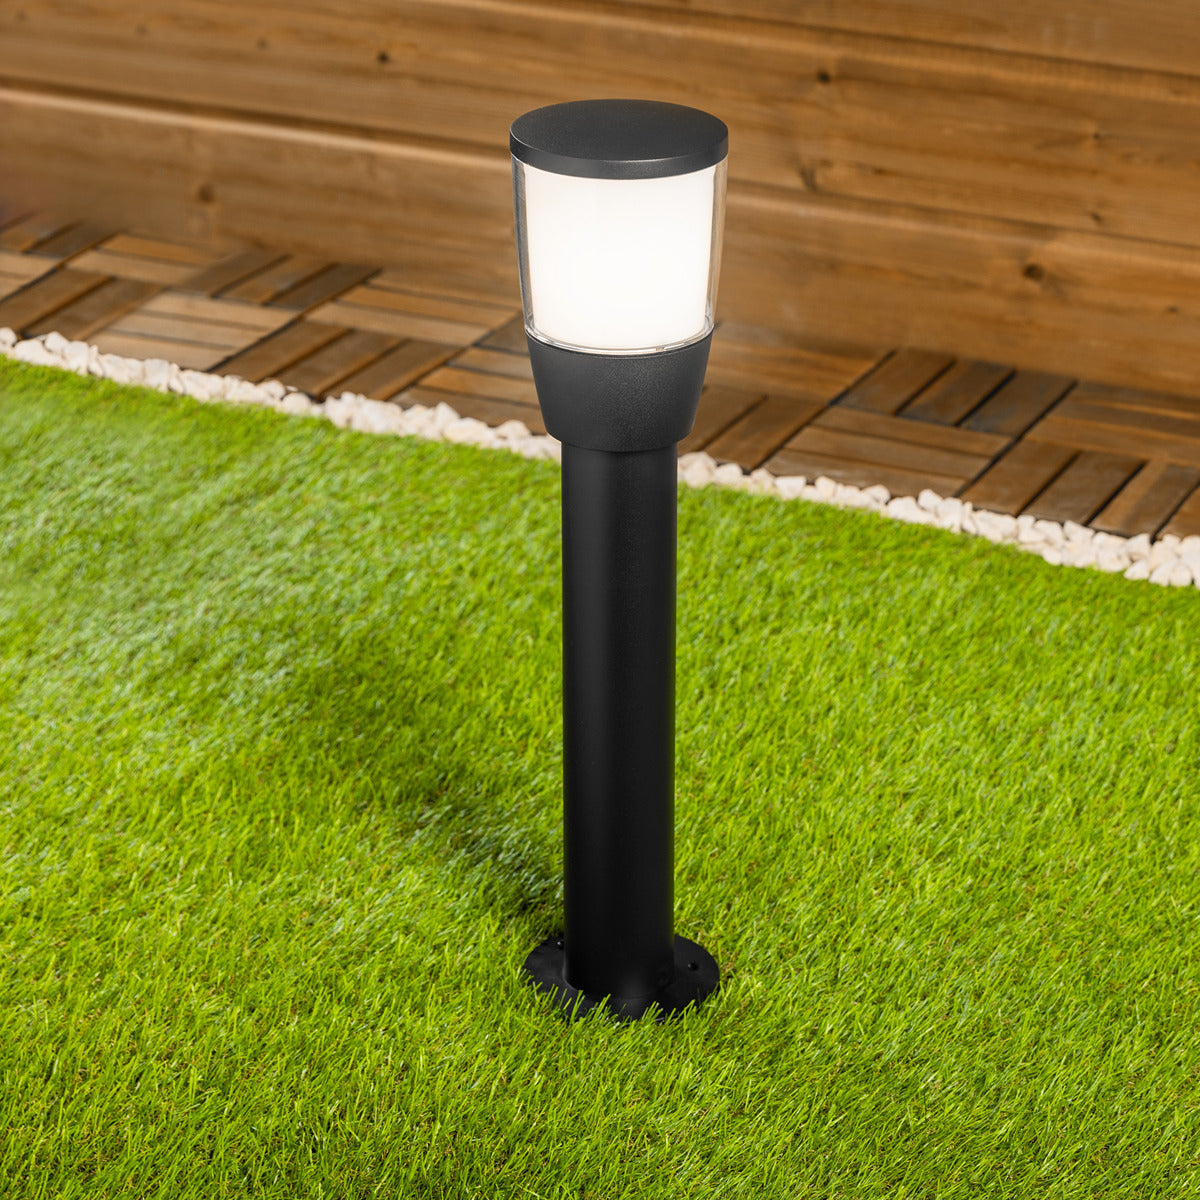 Our Toro post light has a perfect blend of modern and traditional looks, featuring a classic round design and a strong aluminium body paired with an attractive opal diffuser. This versatile post light is suitable for illuminating and securing gardens, driveways, doorways, workspaces, pubs, and hotels.